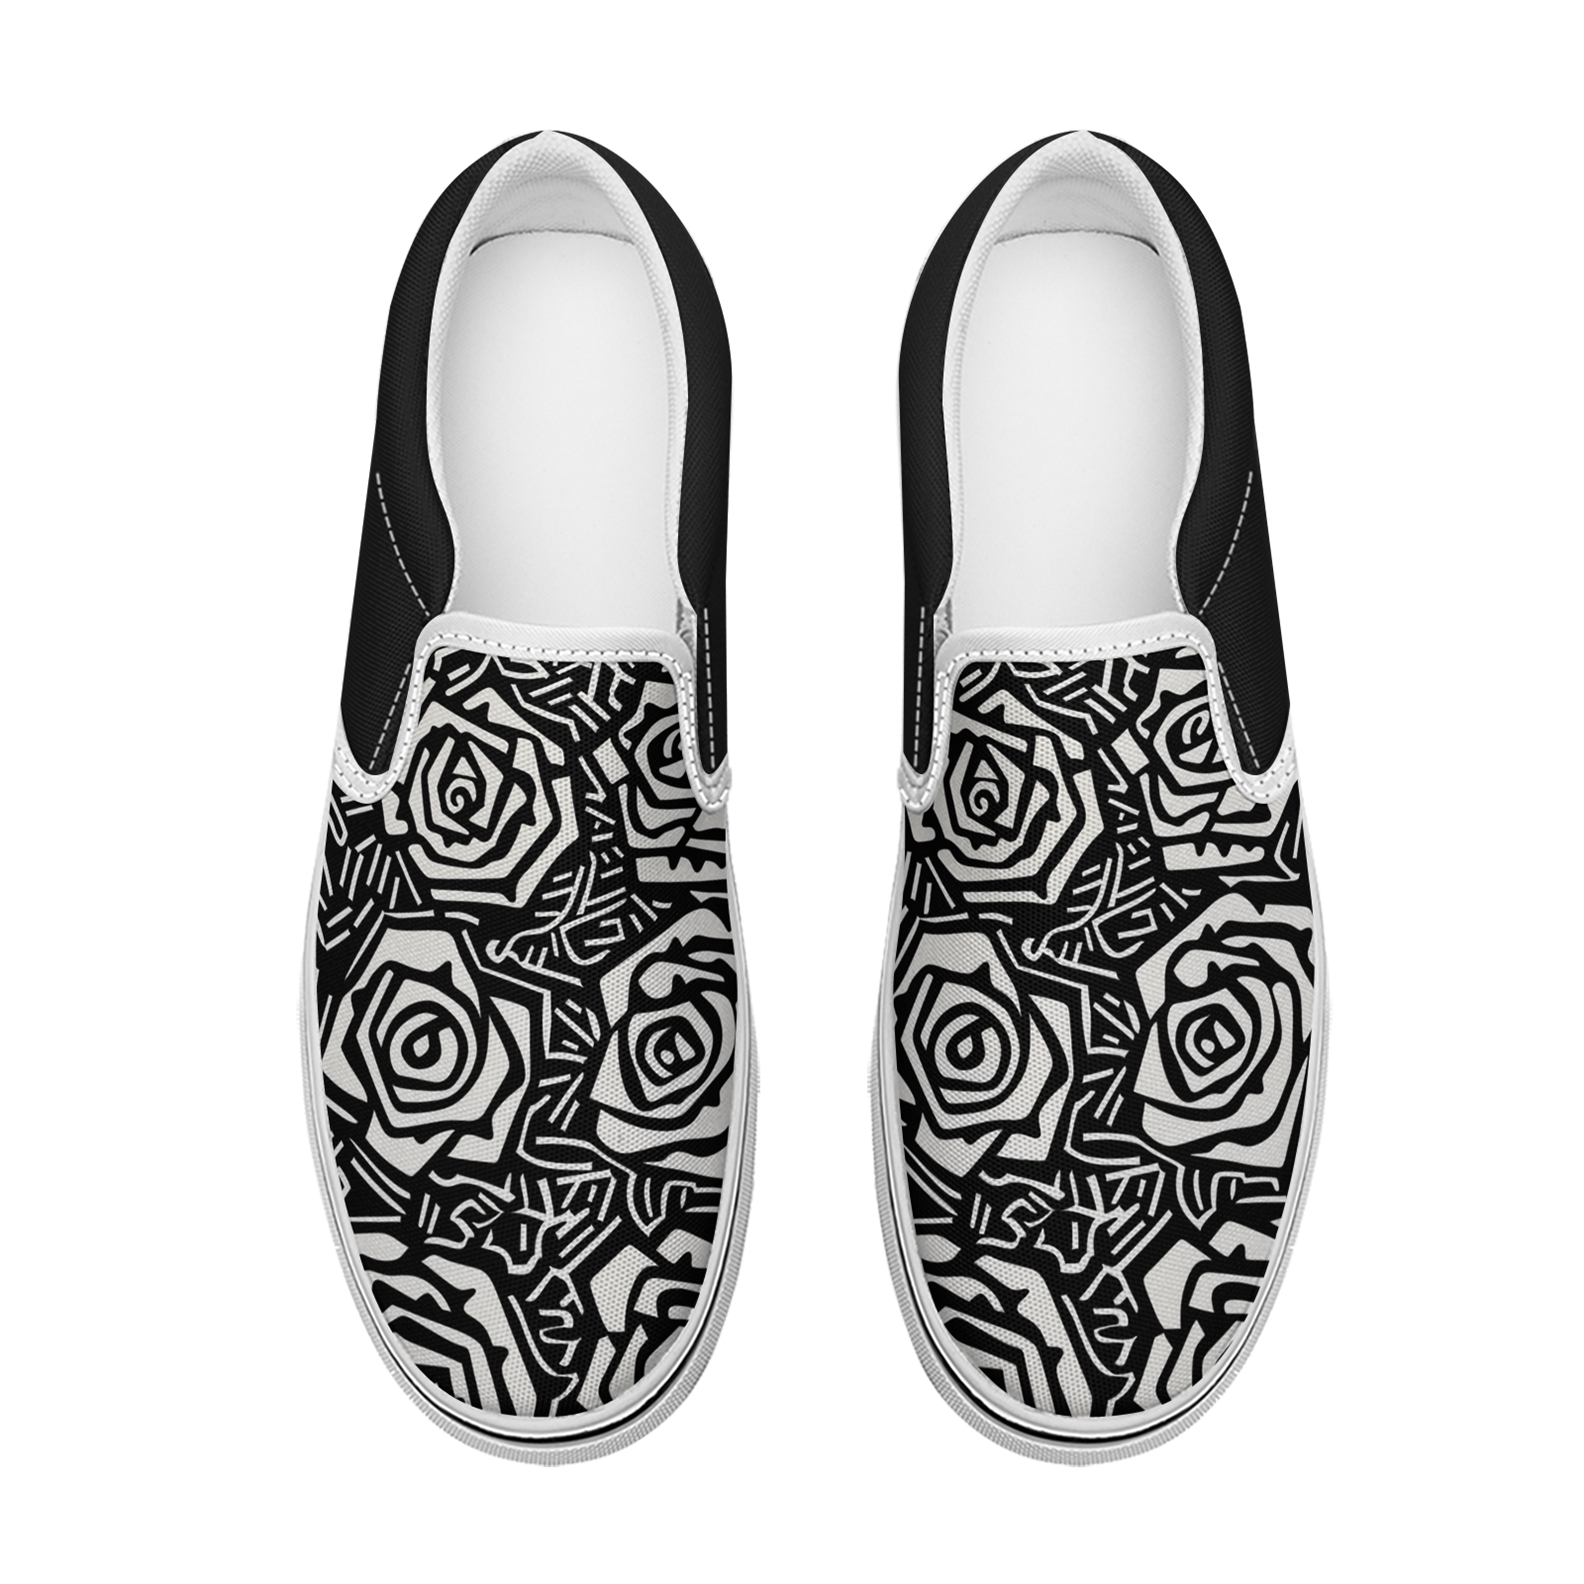 Women's fashion black and white rose print pattern flat canvas slippers casual shoes light and comfortable travel shoes